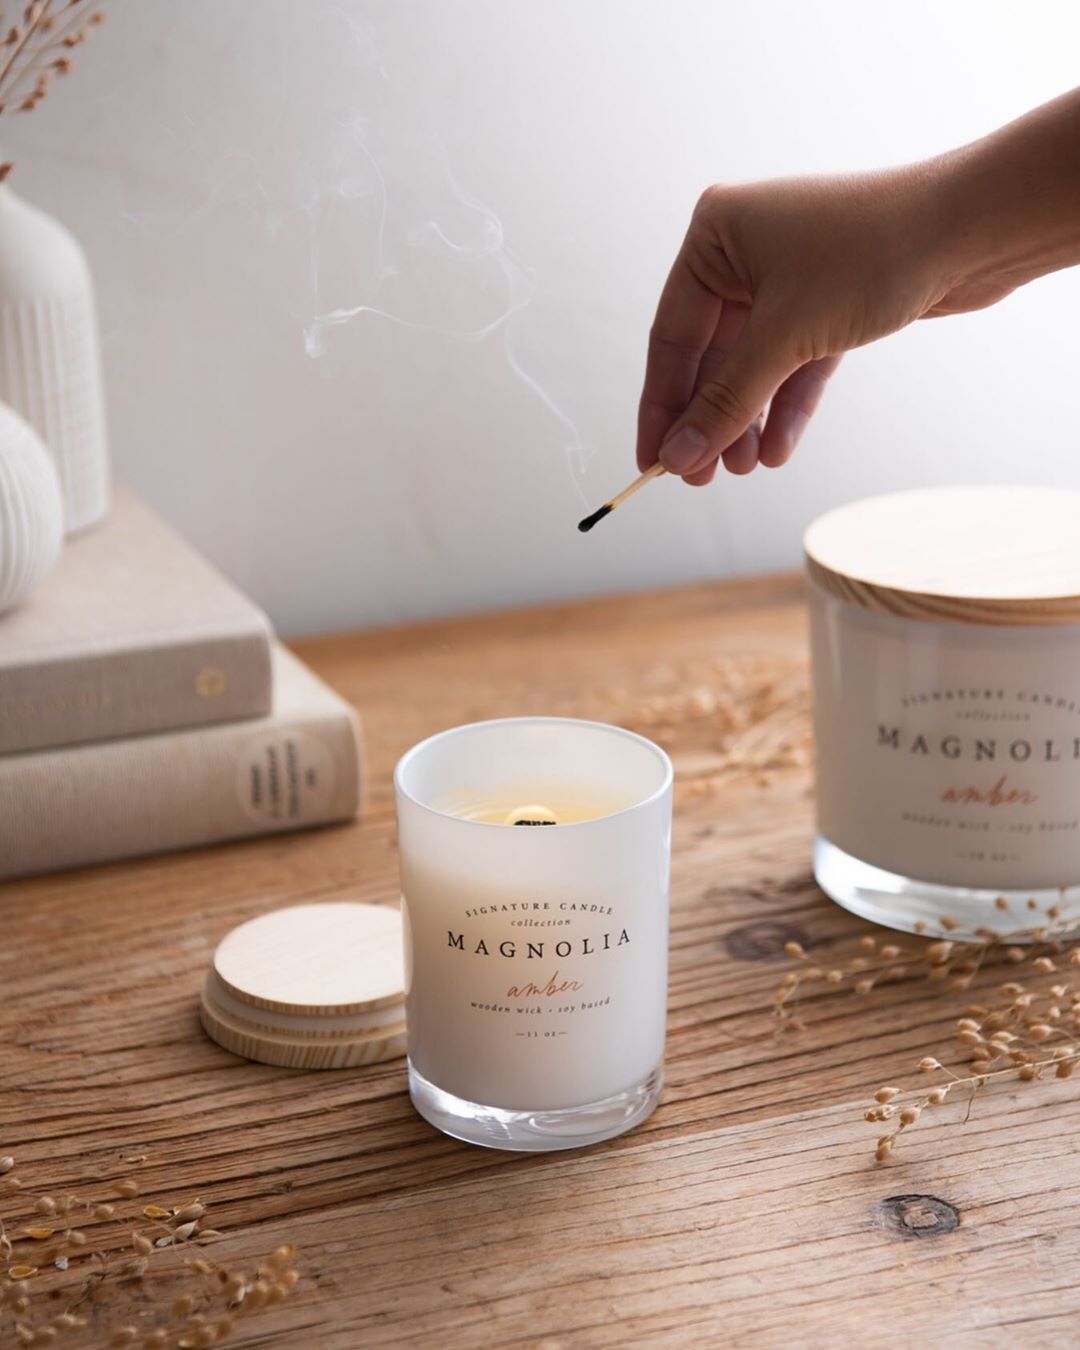 Magnolia Candle -Just Makes Scents Candles & Gifts